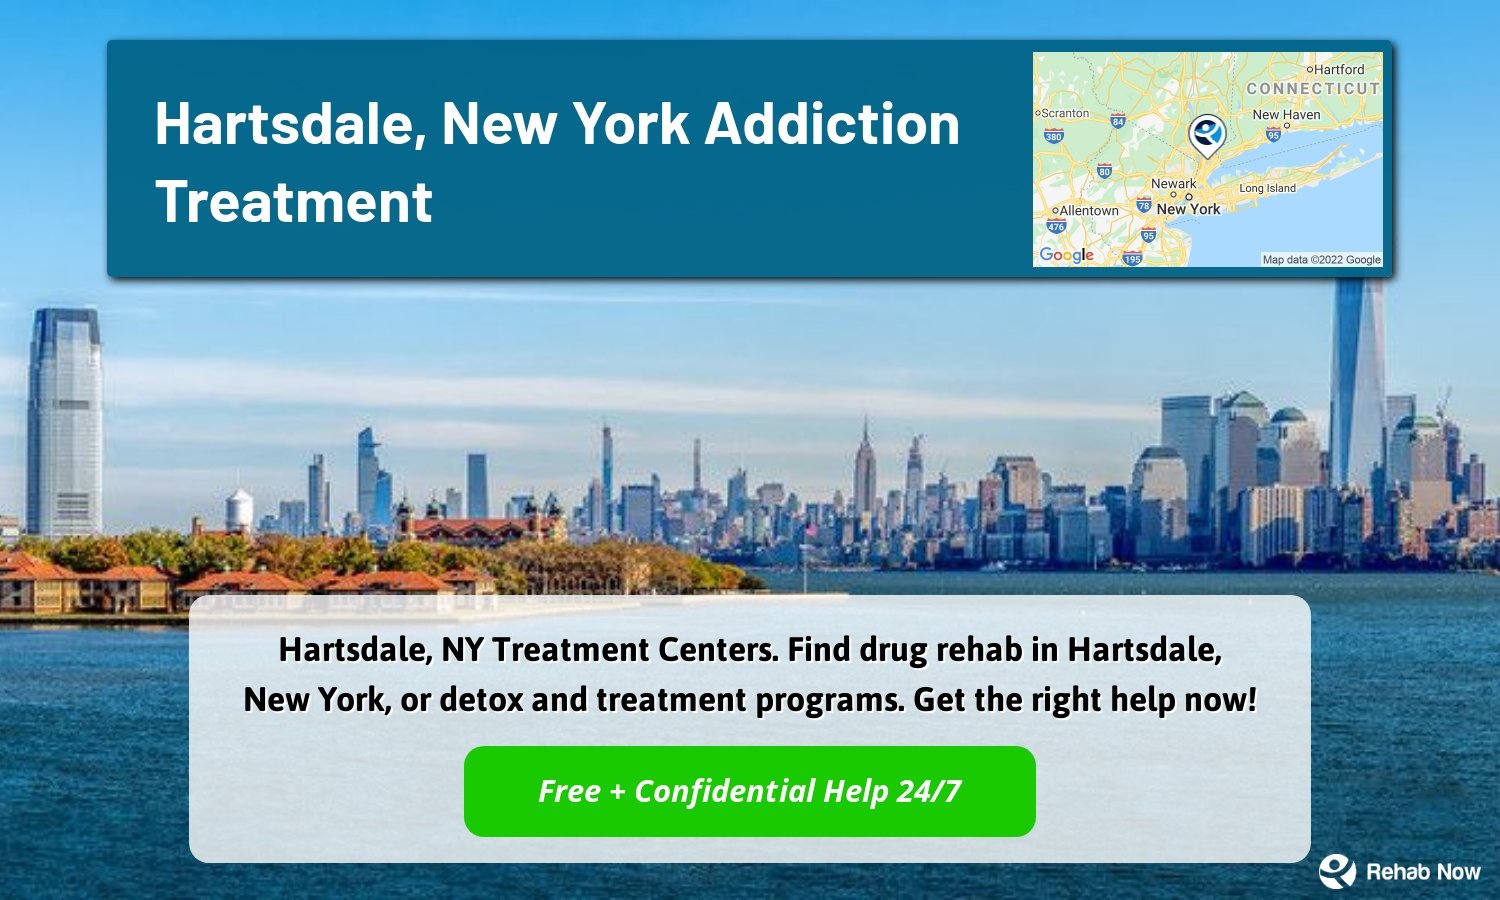 Hartsdale, NY Treatment Centers. Find drug rehab in Hartsdale, New York, or detox and treatment programs. Get the right help now!